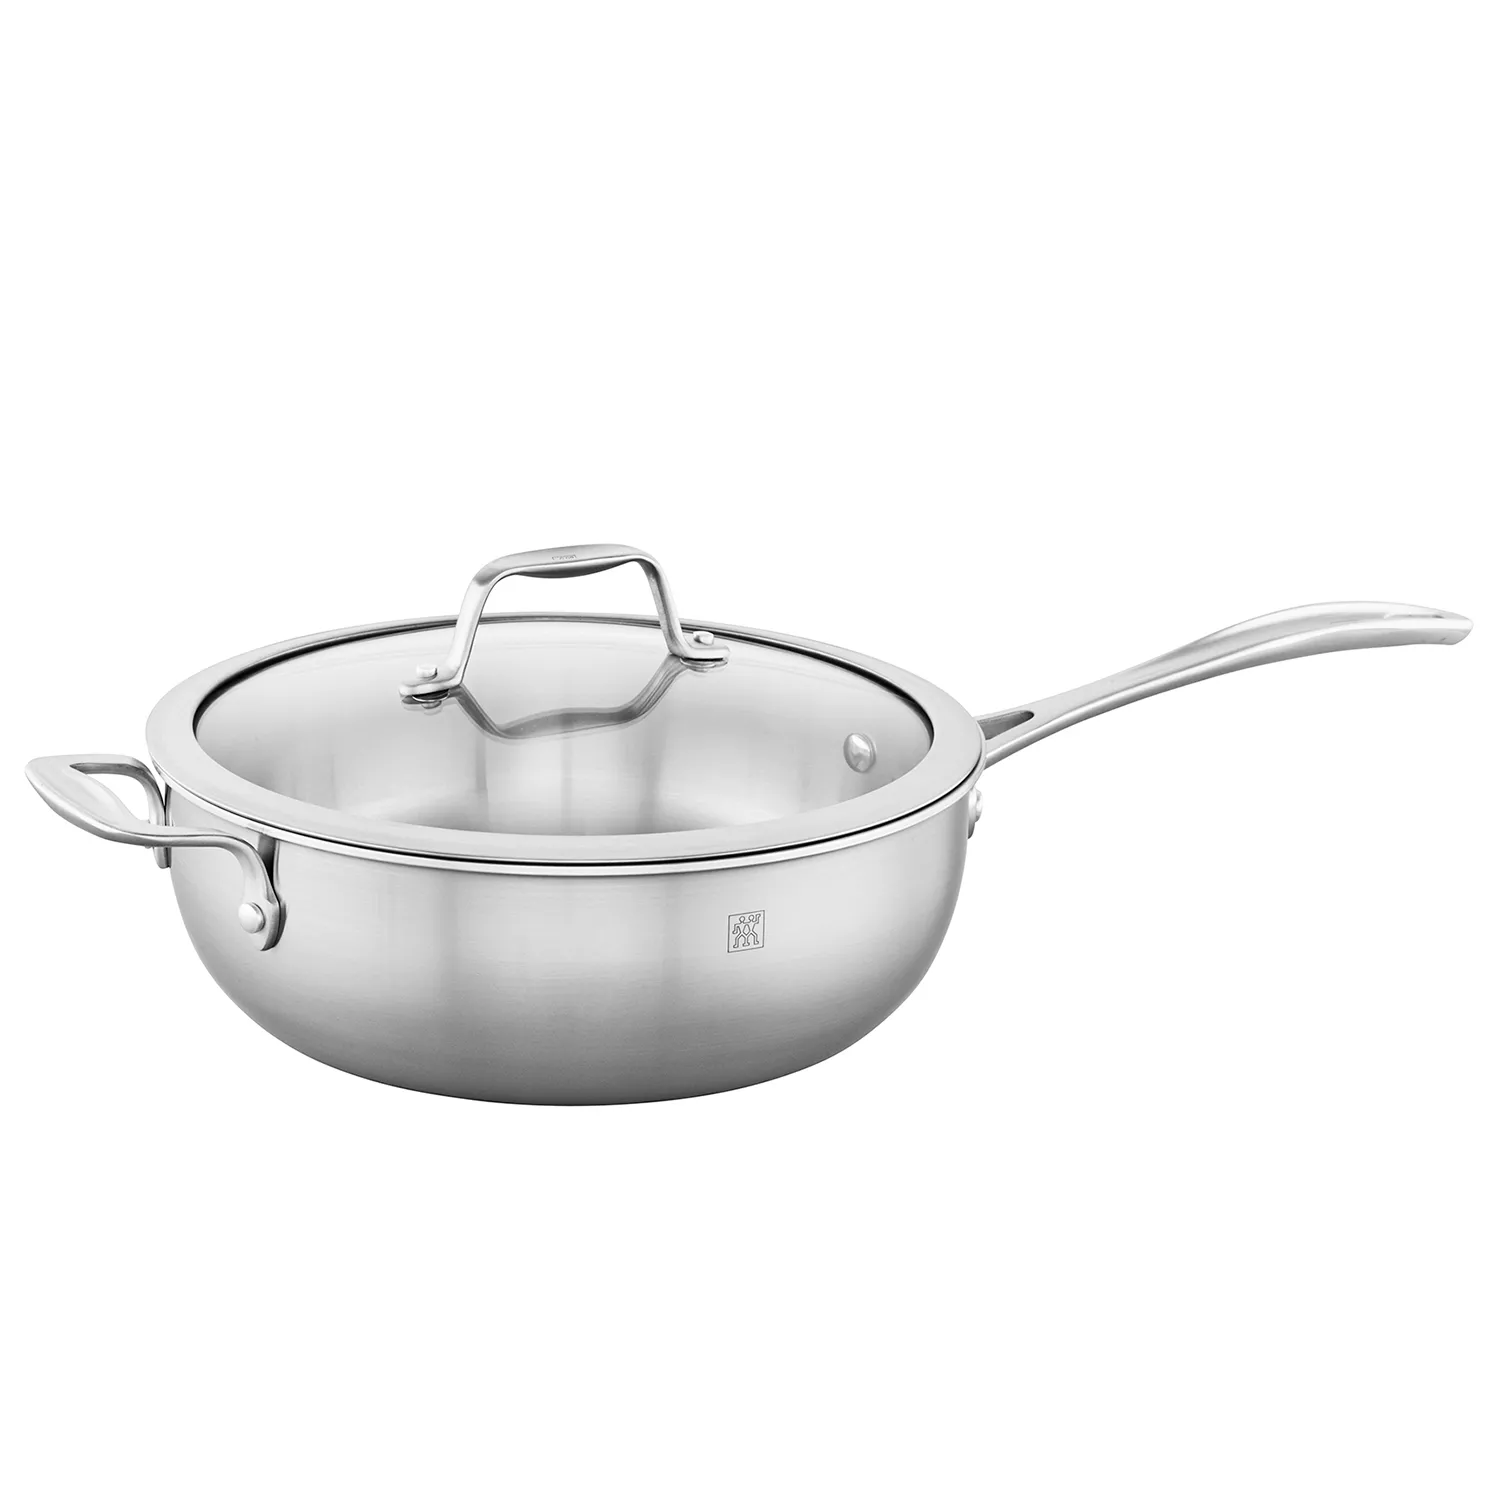 Zwilling J.A. Henckels Spirit 3-ply Stainless Steel Perfect Pan, Silver, 4.6 quart